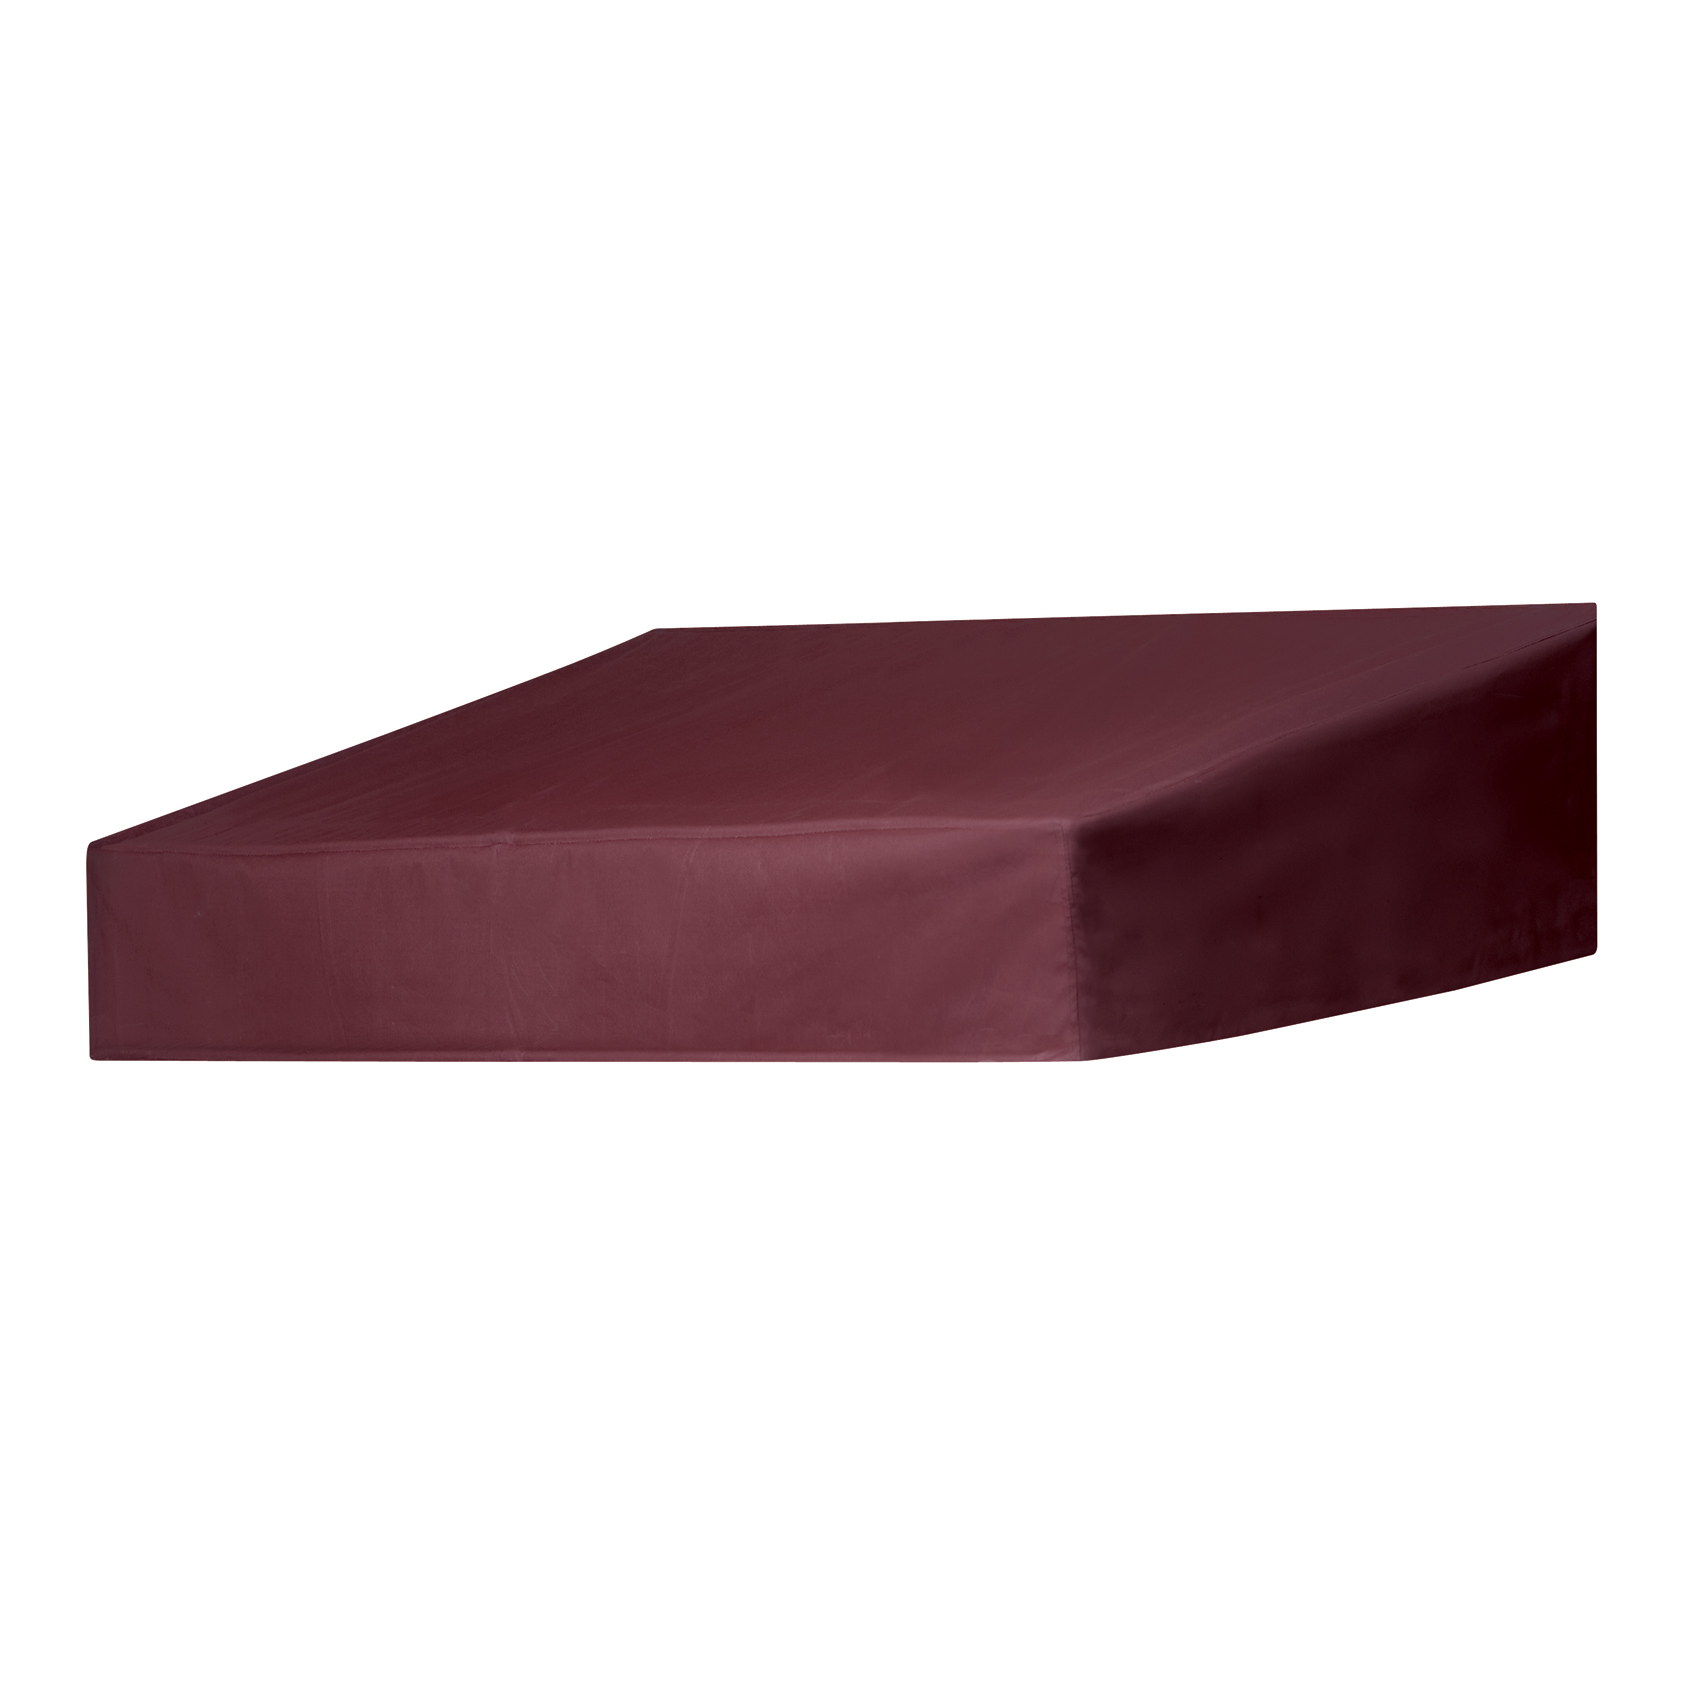 Door Canopy in a Box&reg; 4' Classic Style Door Canopy Replacement Cover in Assorted Colors